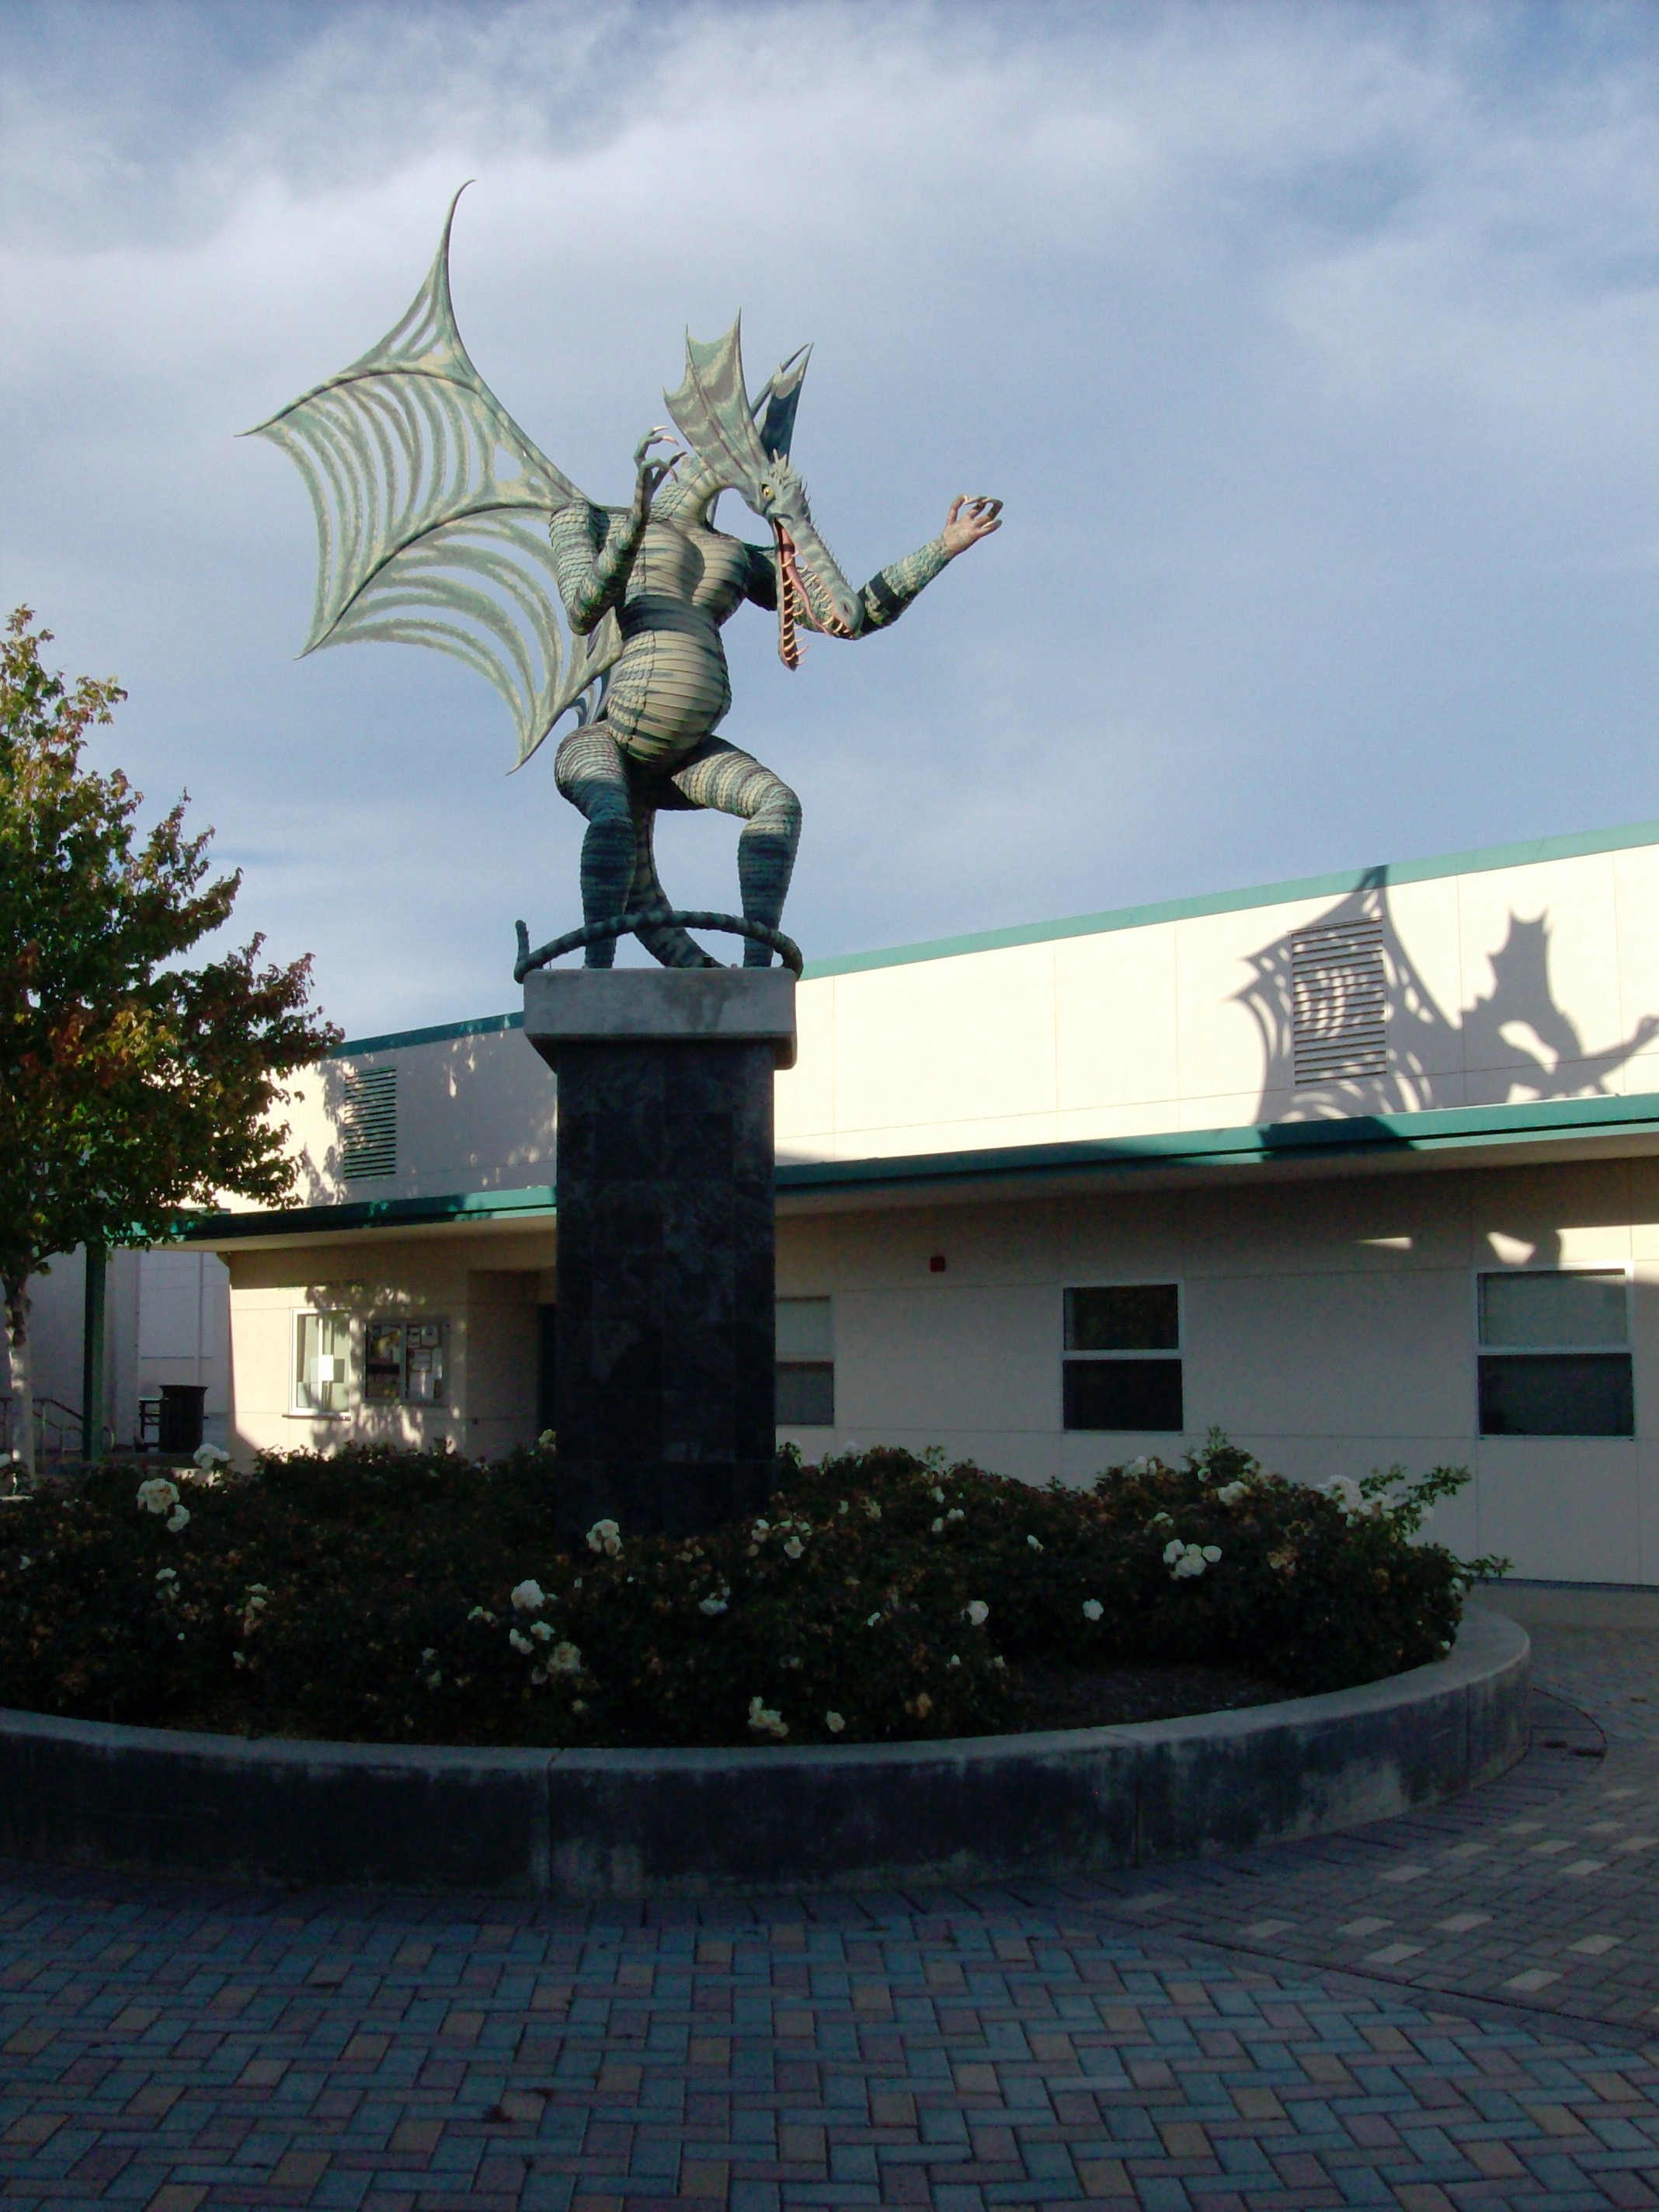  Sonoma Valley High School Dragon mascot stands on a twelve-foot high pedestal in the center of Chet Sharek Plaza, boldly guarding the campus entrance 